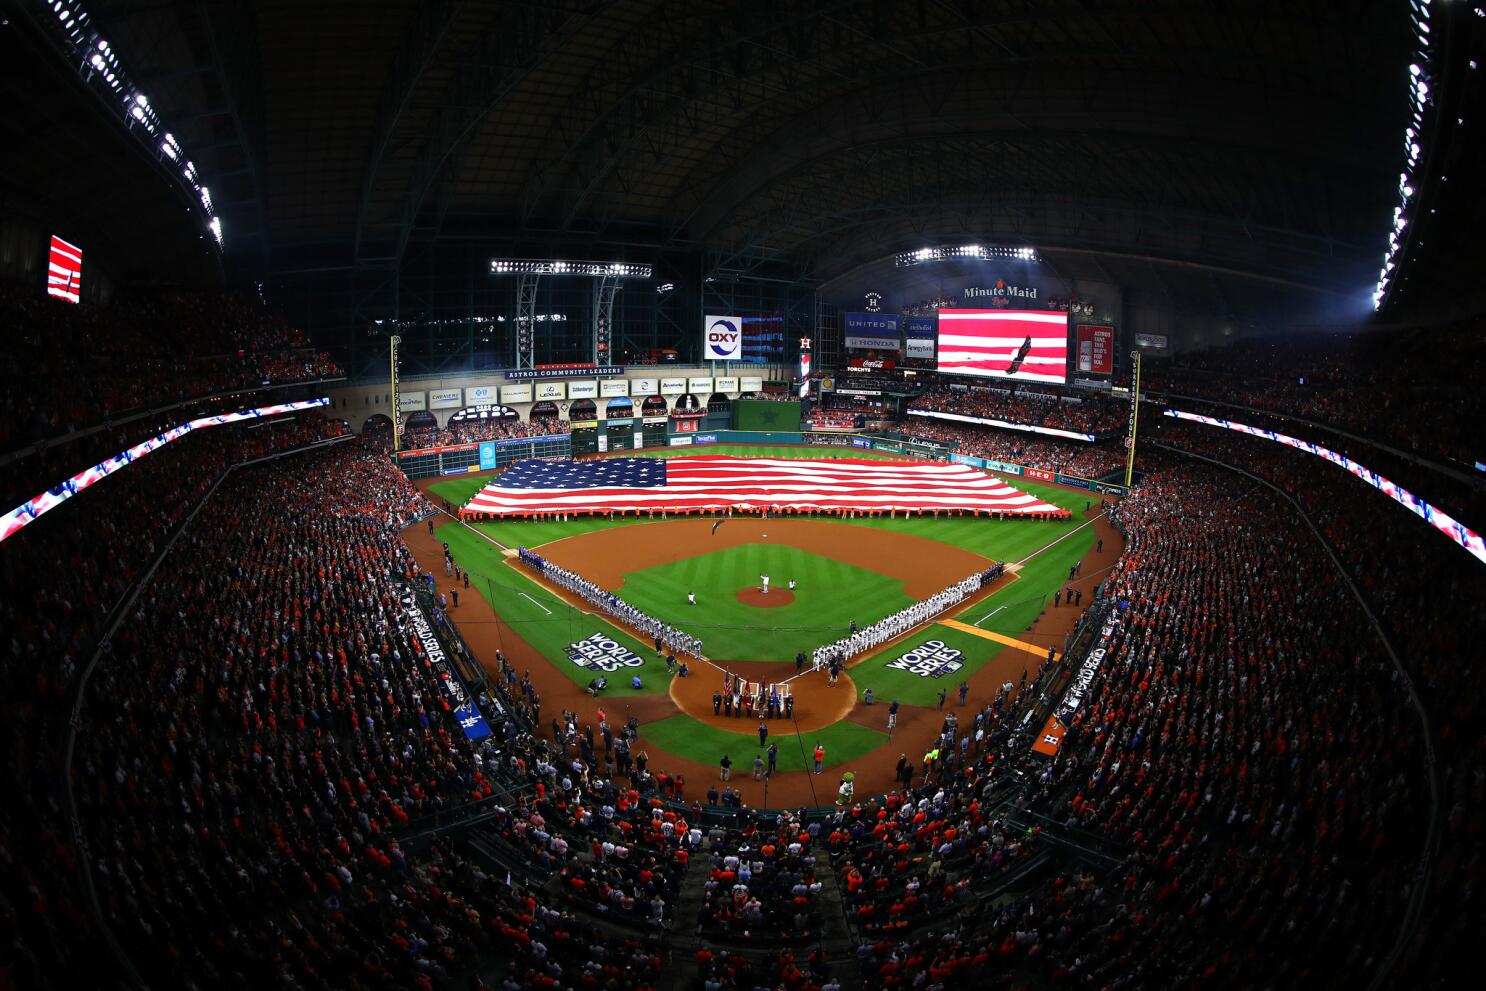 Shohei Ohtani of the Los Angeles Angels bats against the Houston Astros  during the Major League Baseball game Players Weekend at Minute Maid Park  on August 25, 2019 in Houston, United States.